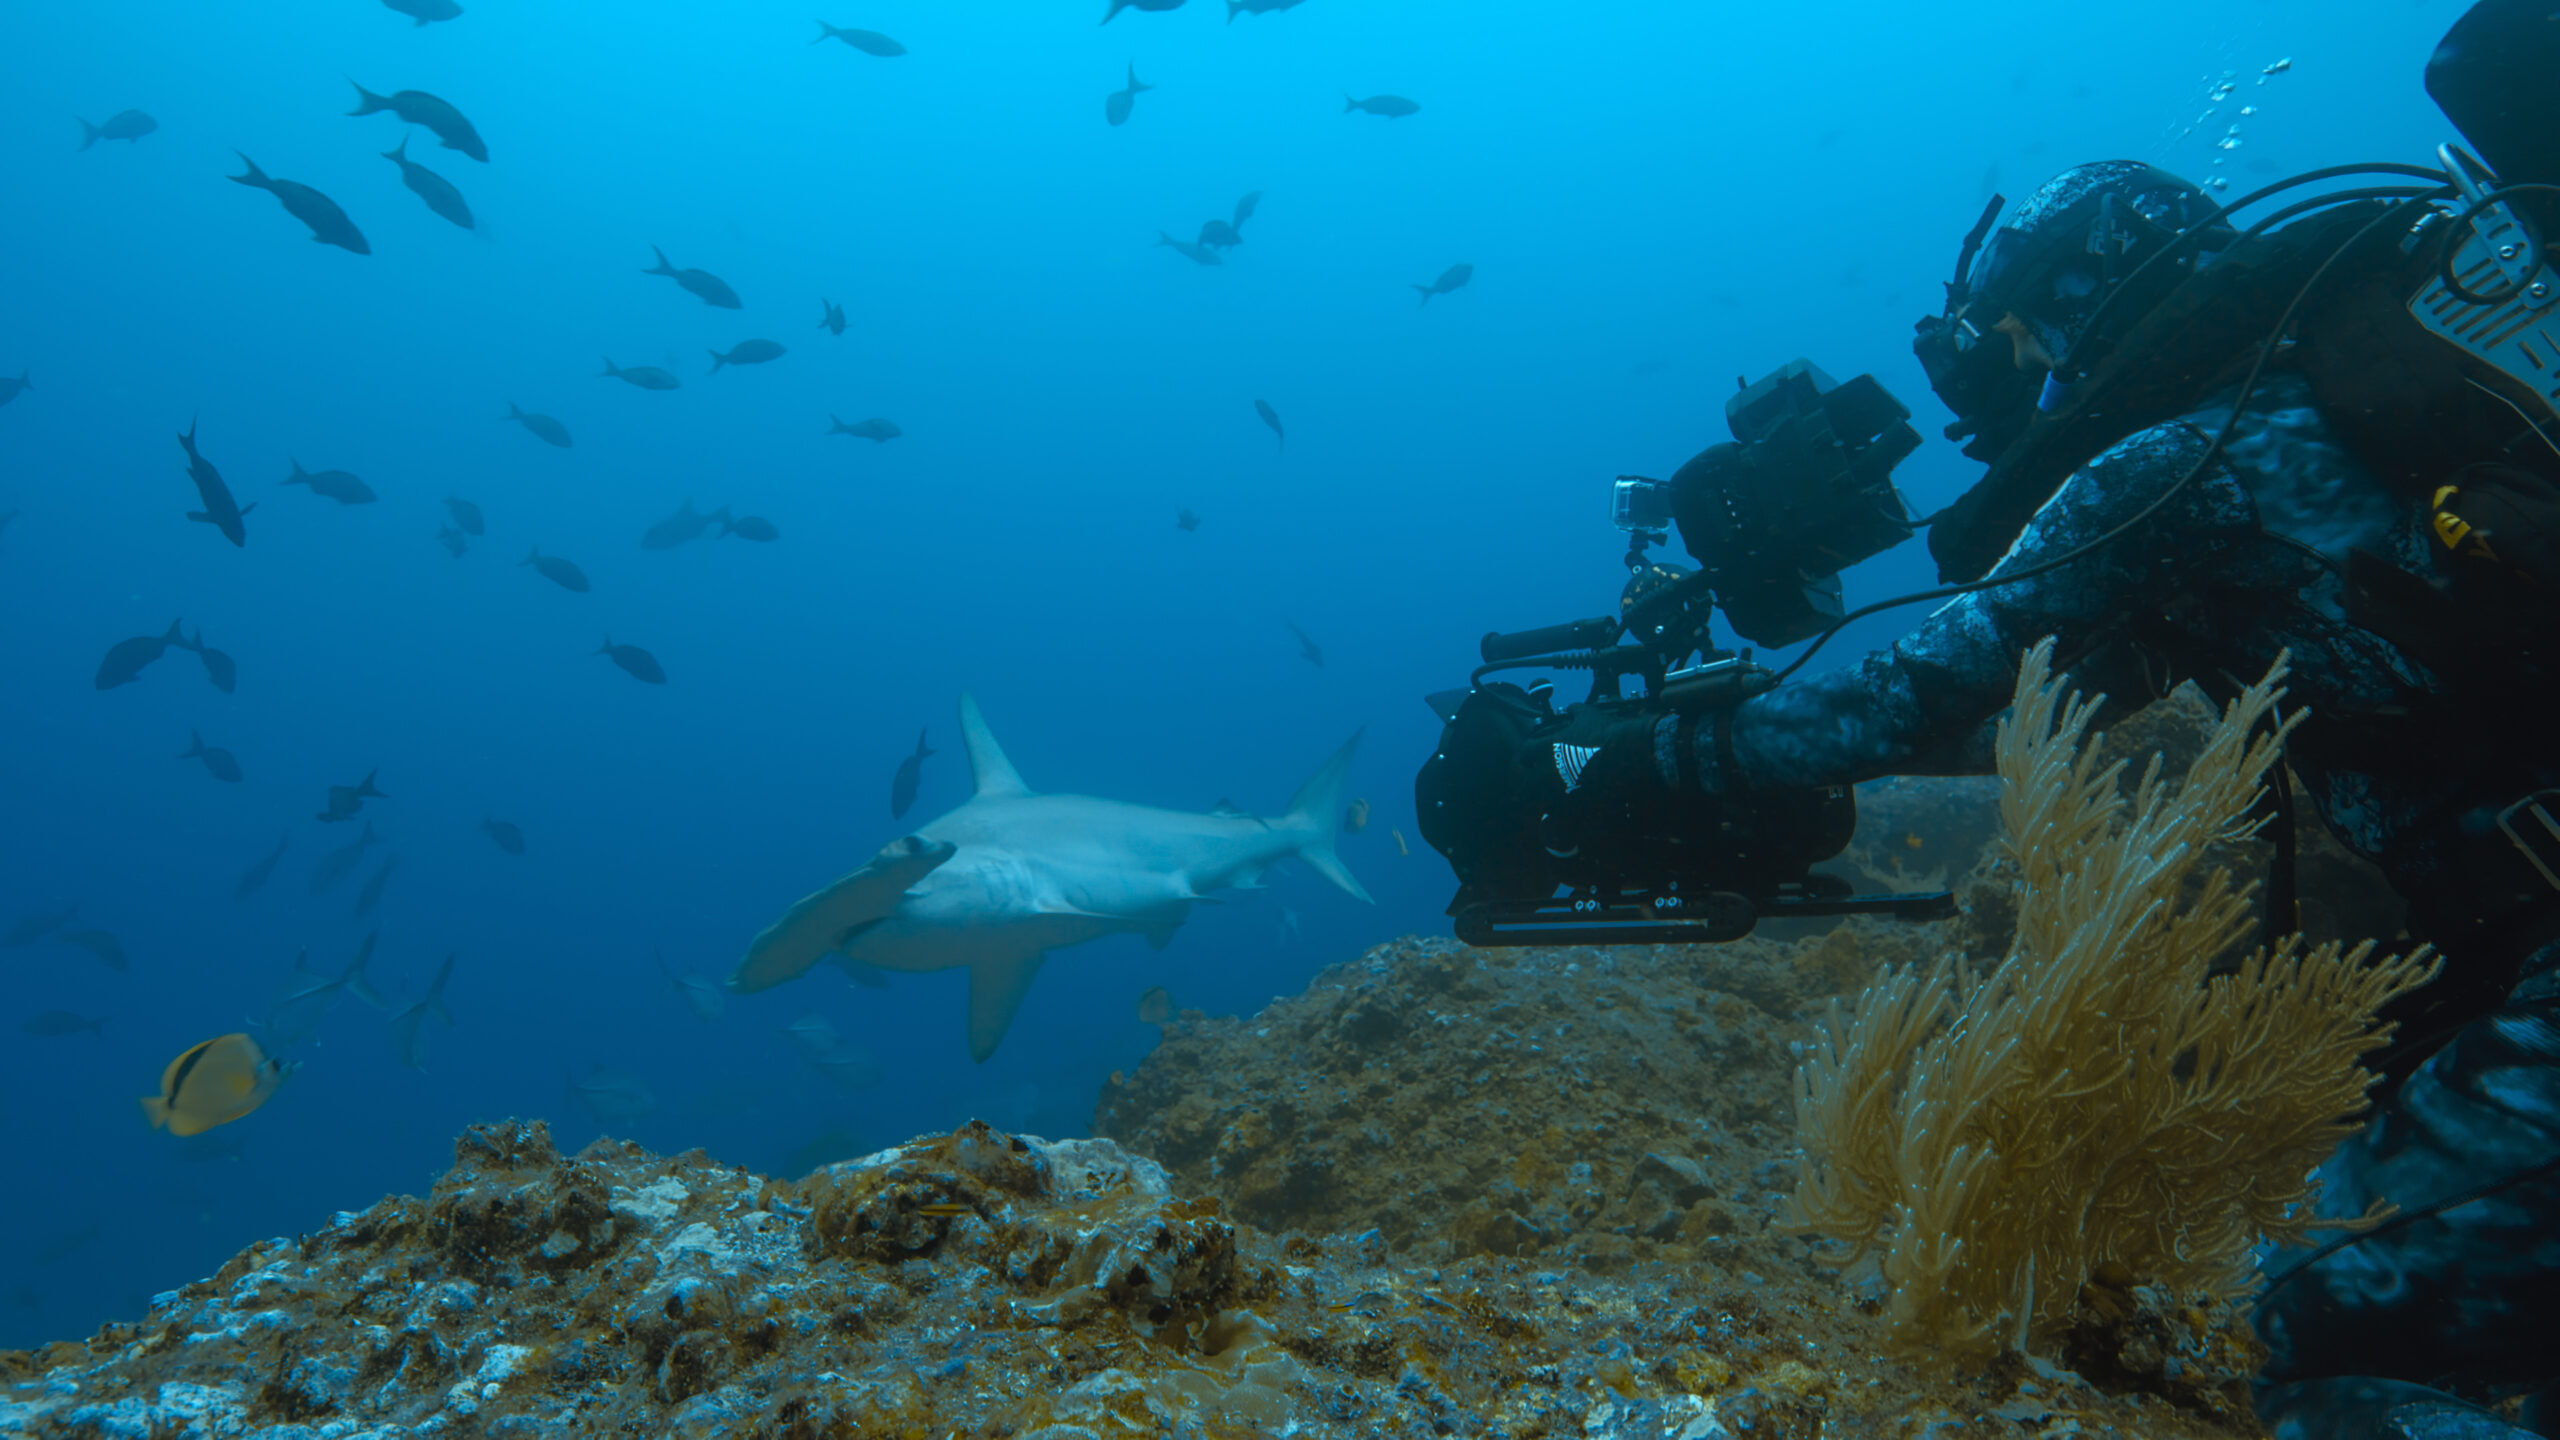 Bertie Gregory perched on rock filming a hammerhead shark. (Credit: National Geographic for Disney+)